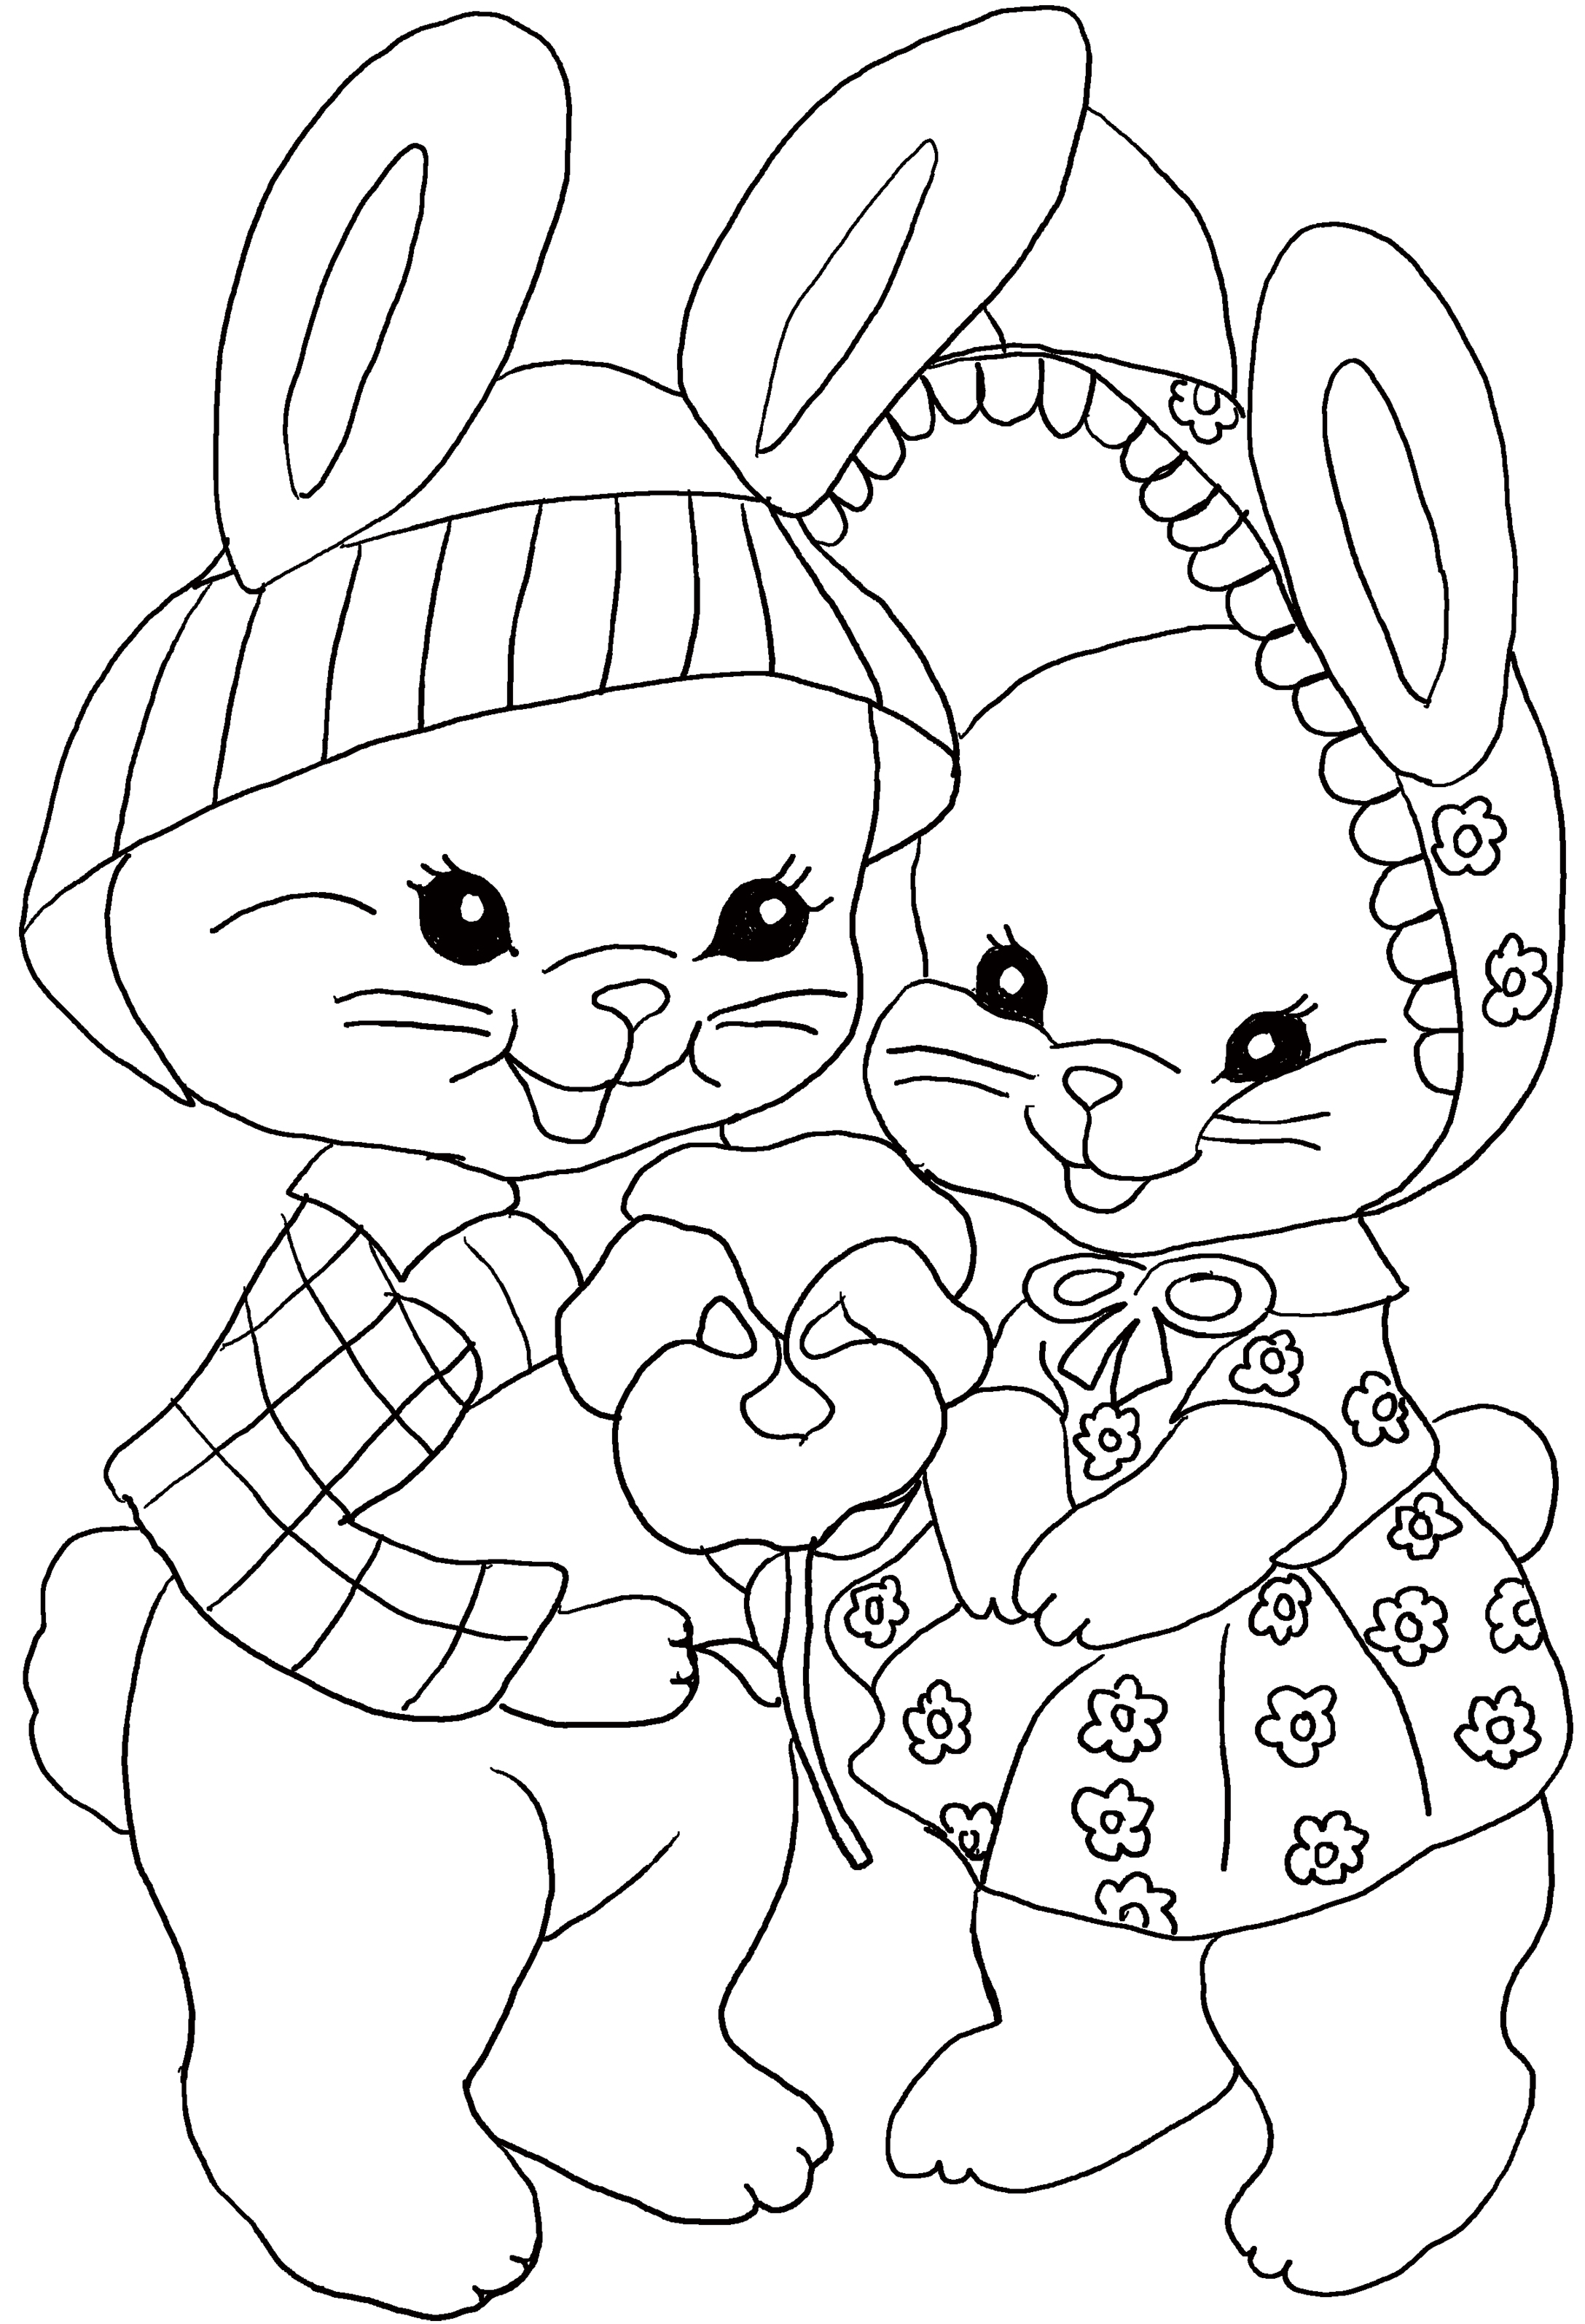 Free Easter Coloring Pages for Kids: High Printing Quality